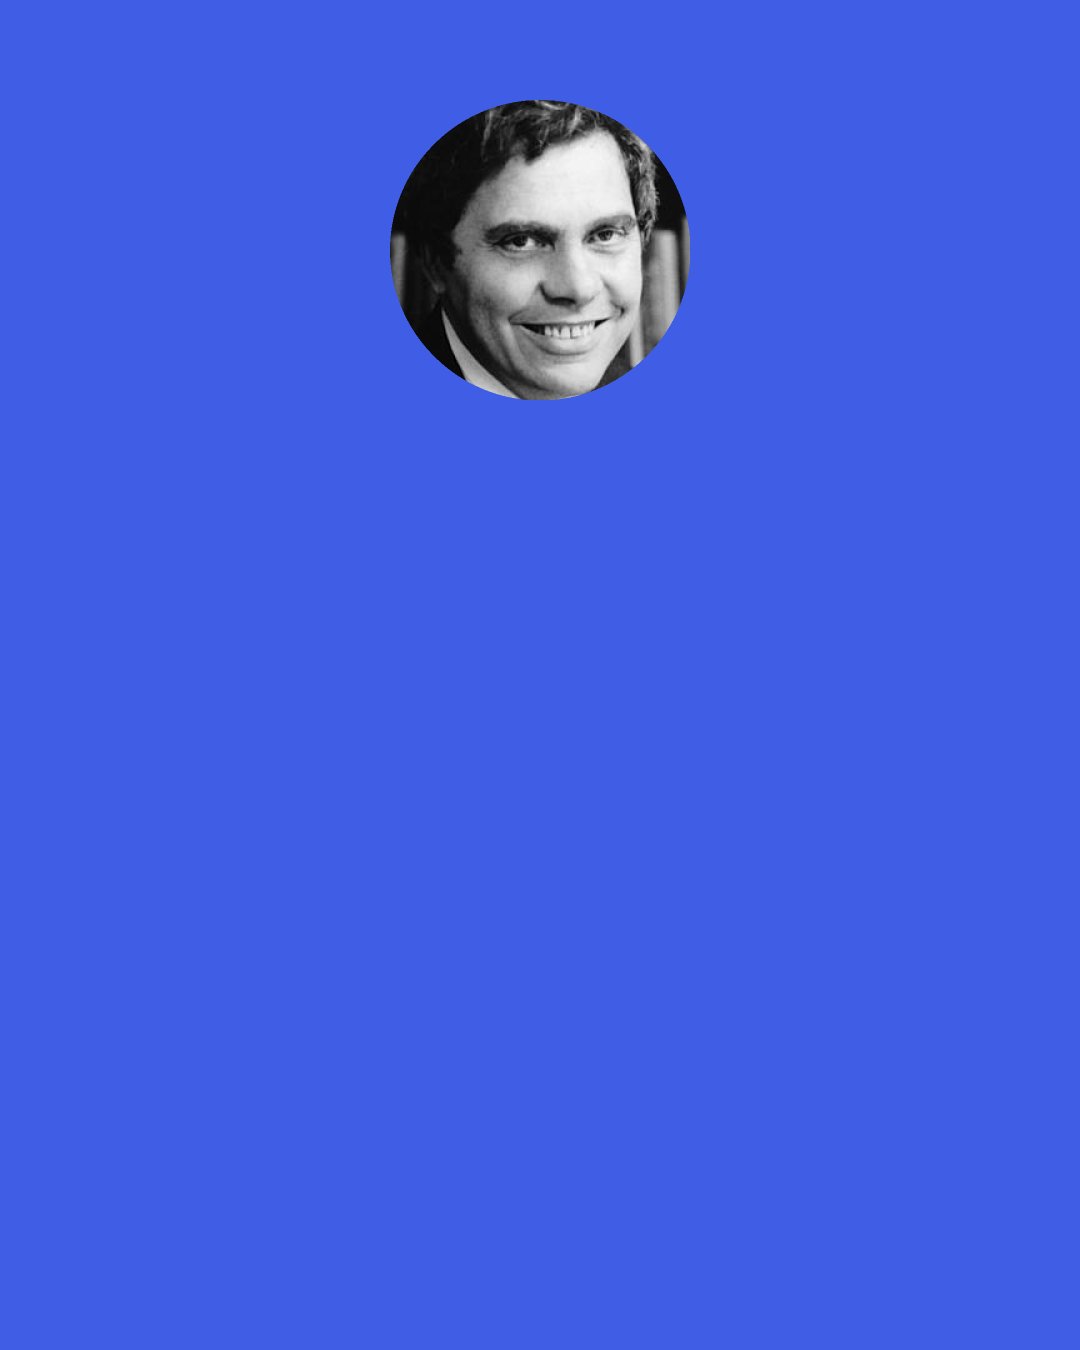 Neil Postman: The line-by-line, sequential, continuous form of the printed page slowly began to lose its resonance as a metaphor of how knowledge was to be acquired and how the world was to be understood. "Knowing" the facts took on a new meaning, for it did not imply that one understood implications, background, or connections. Telegraphic discourse permitted no time for historical perspectives and gave no priority to the qualitative. To the telegraph, intelligence meant knowing of lots of things, not knowing about them.